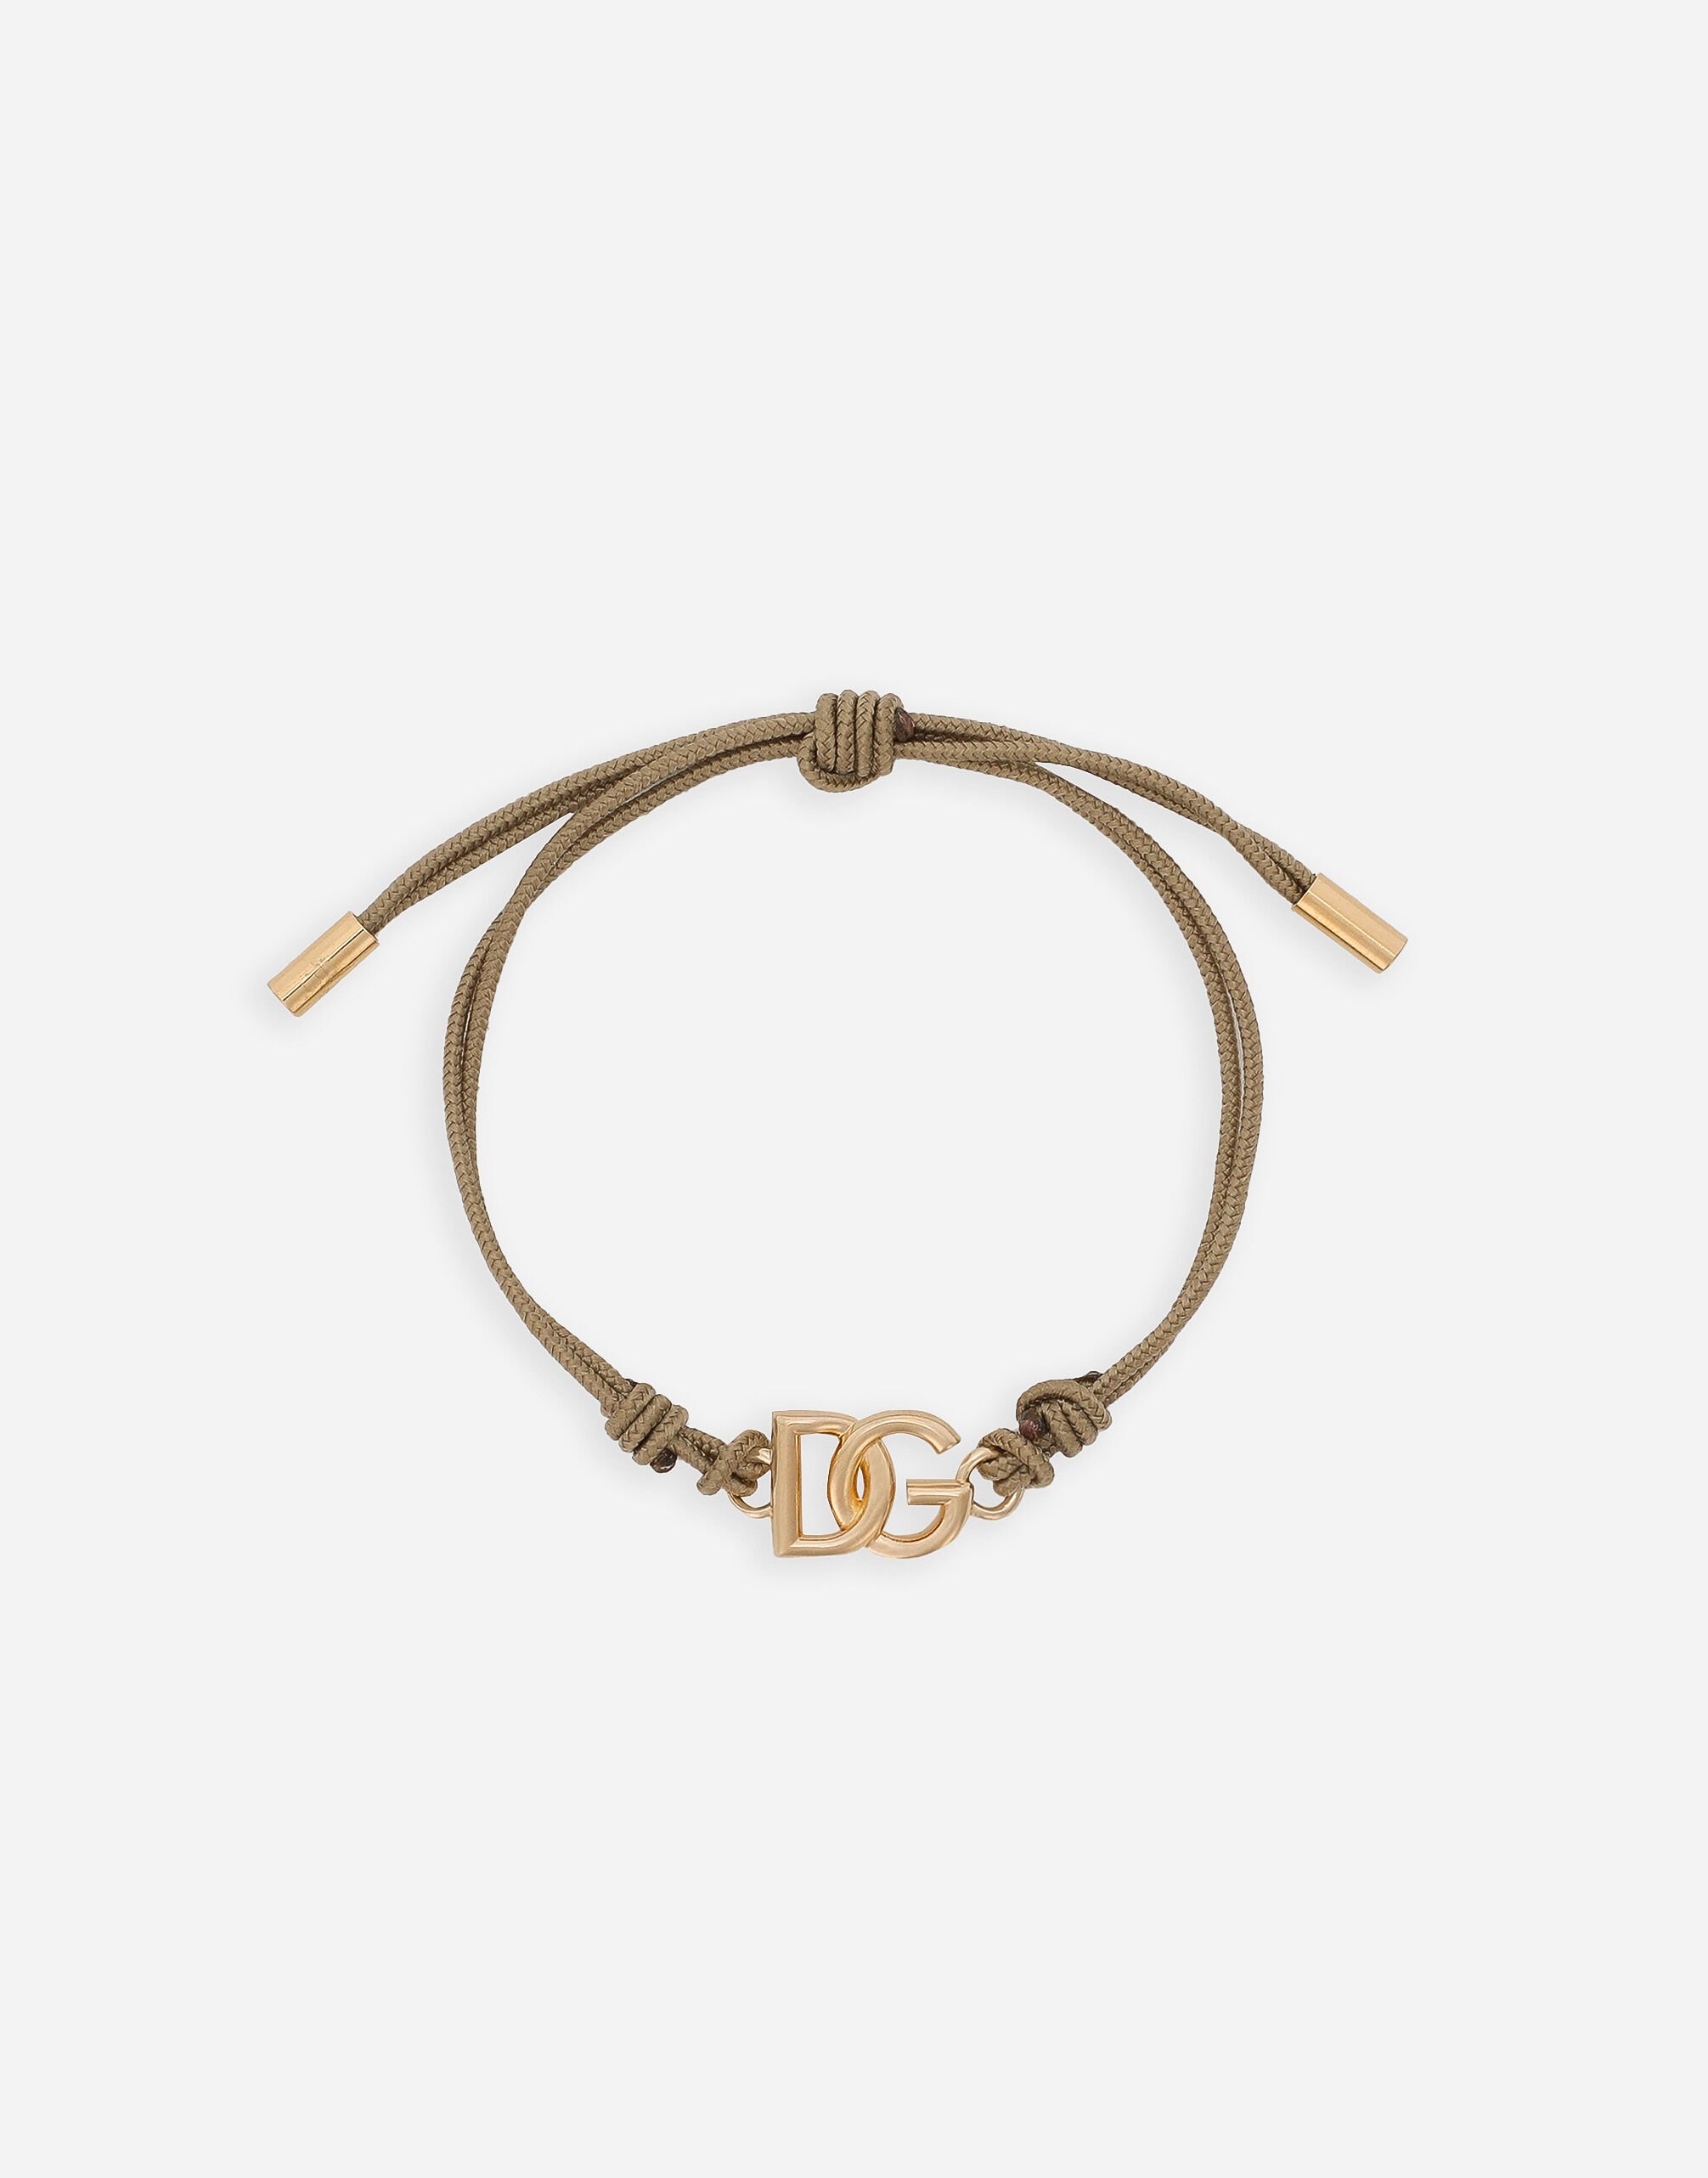 Dolce & Gabbana Bracelet with cord and DG logo Gold BB7287AY828